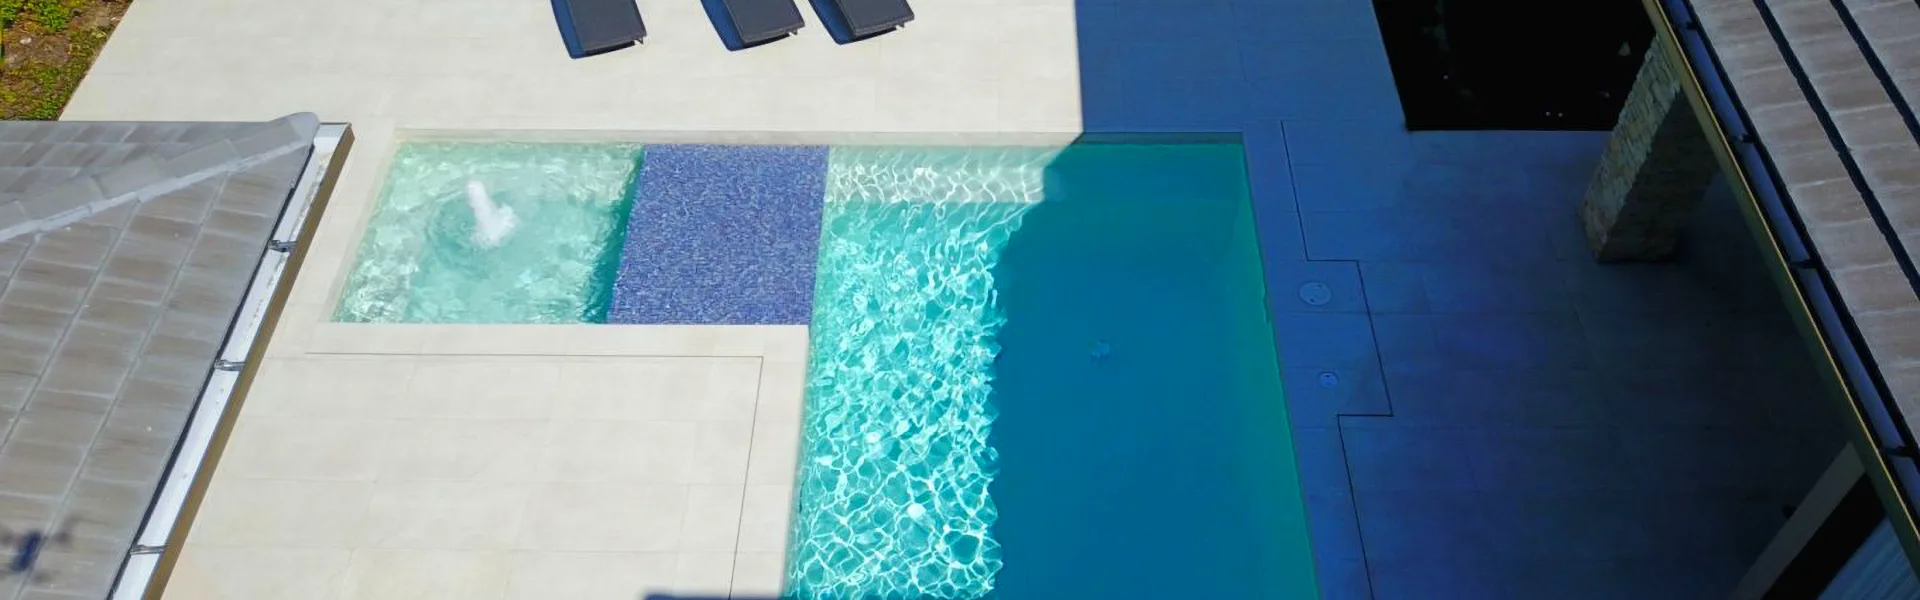 Discover the World of Luxury: Top 5 Geometric Pool Designs